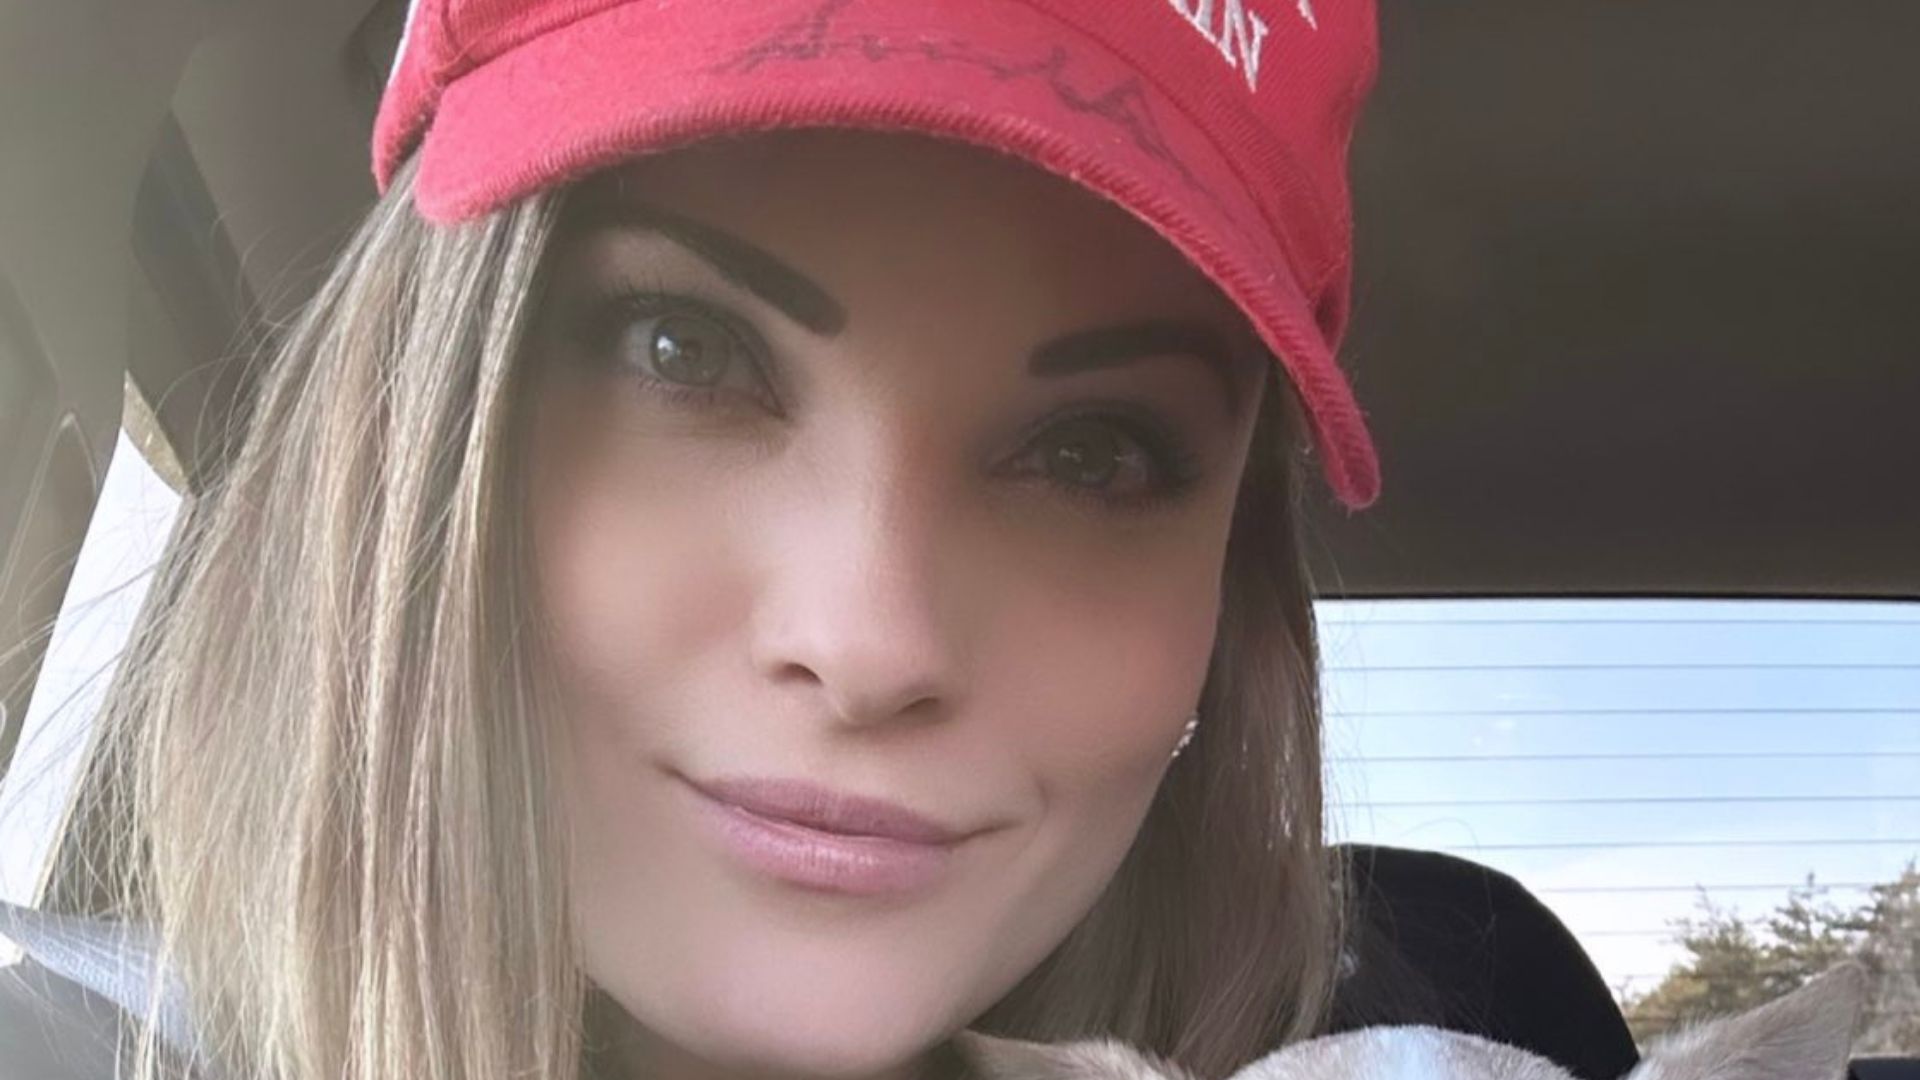 Trump Supporter Wearing MAGA Hat Claims Discrimination on American ...